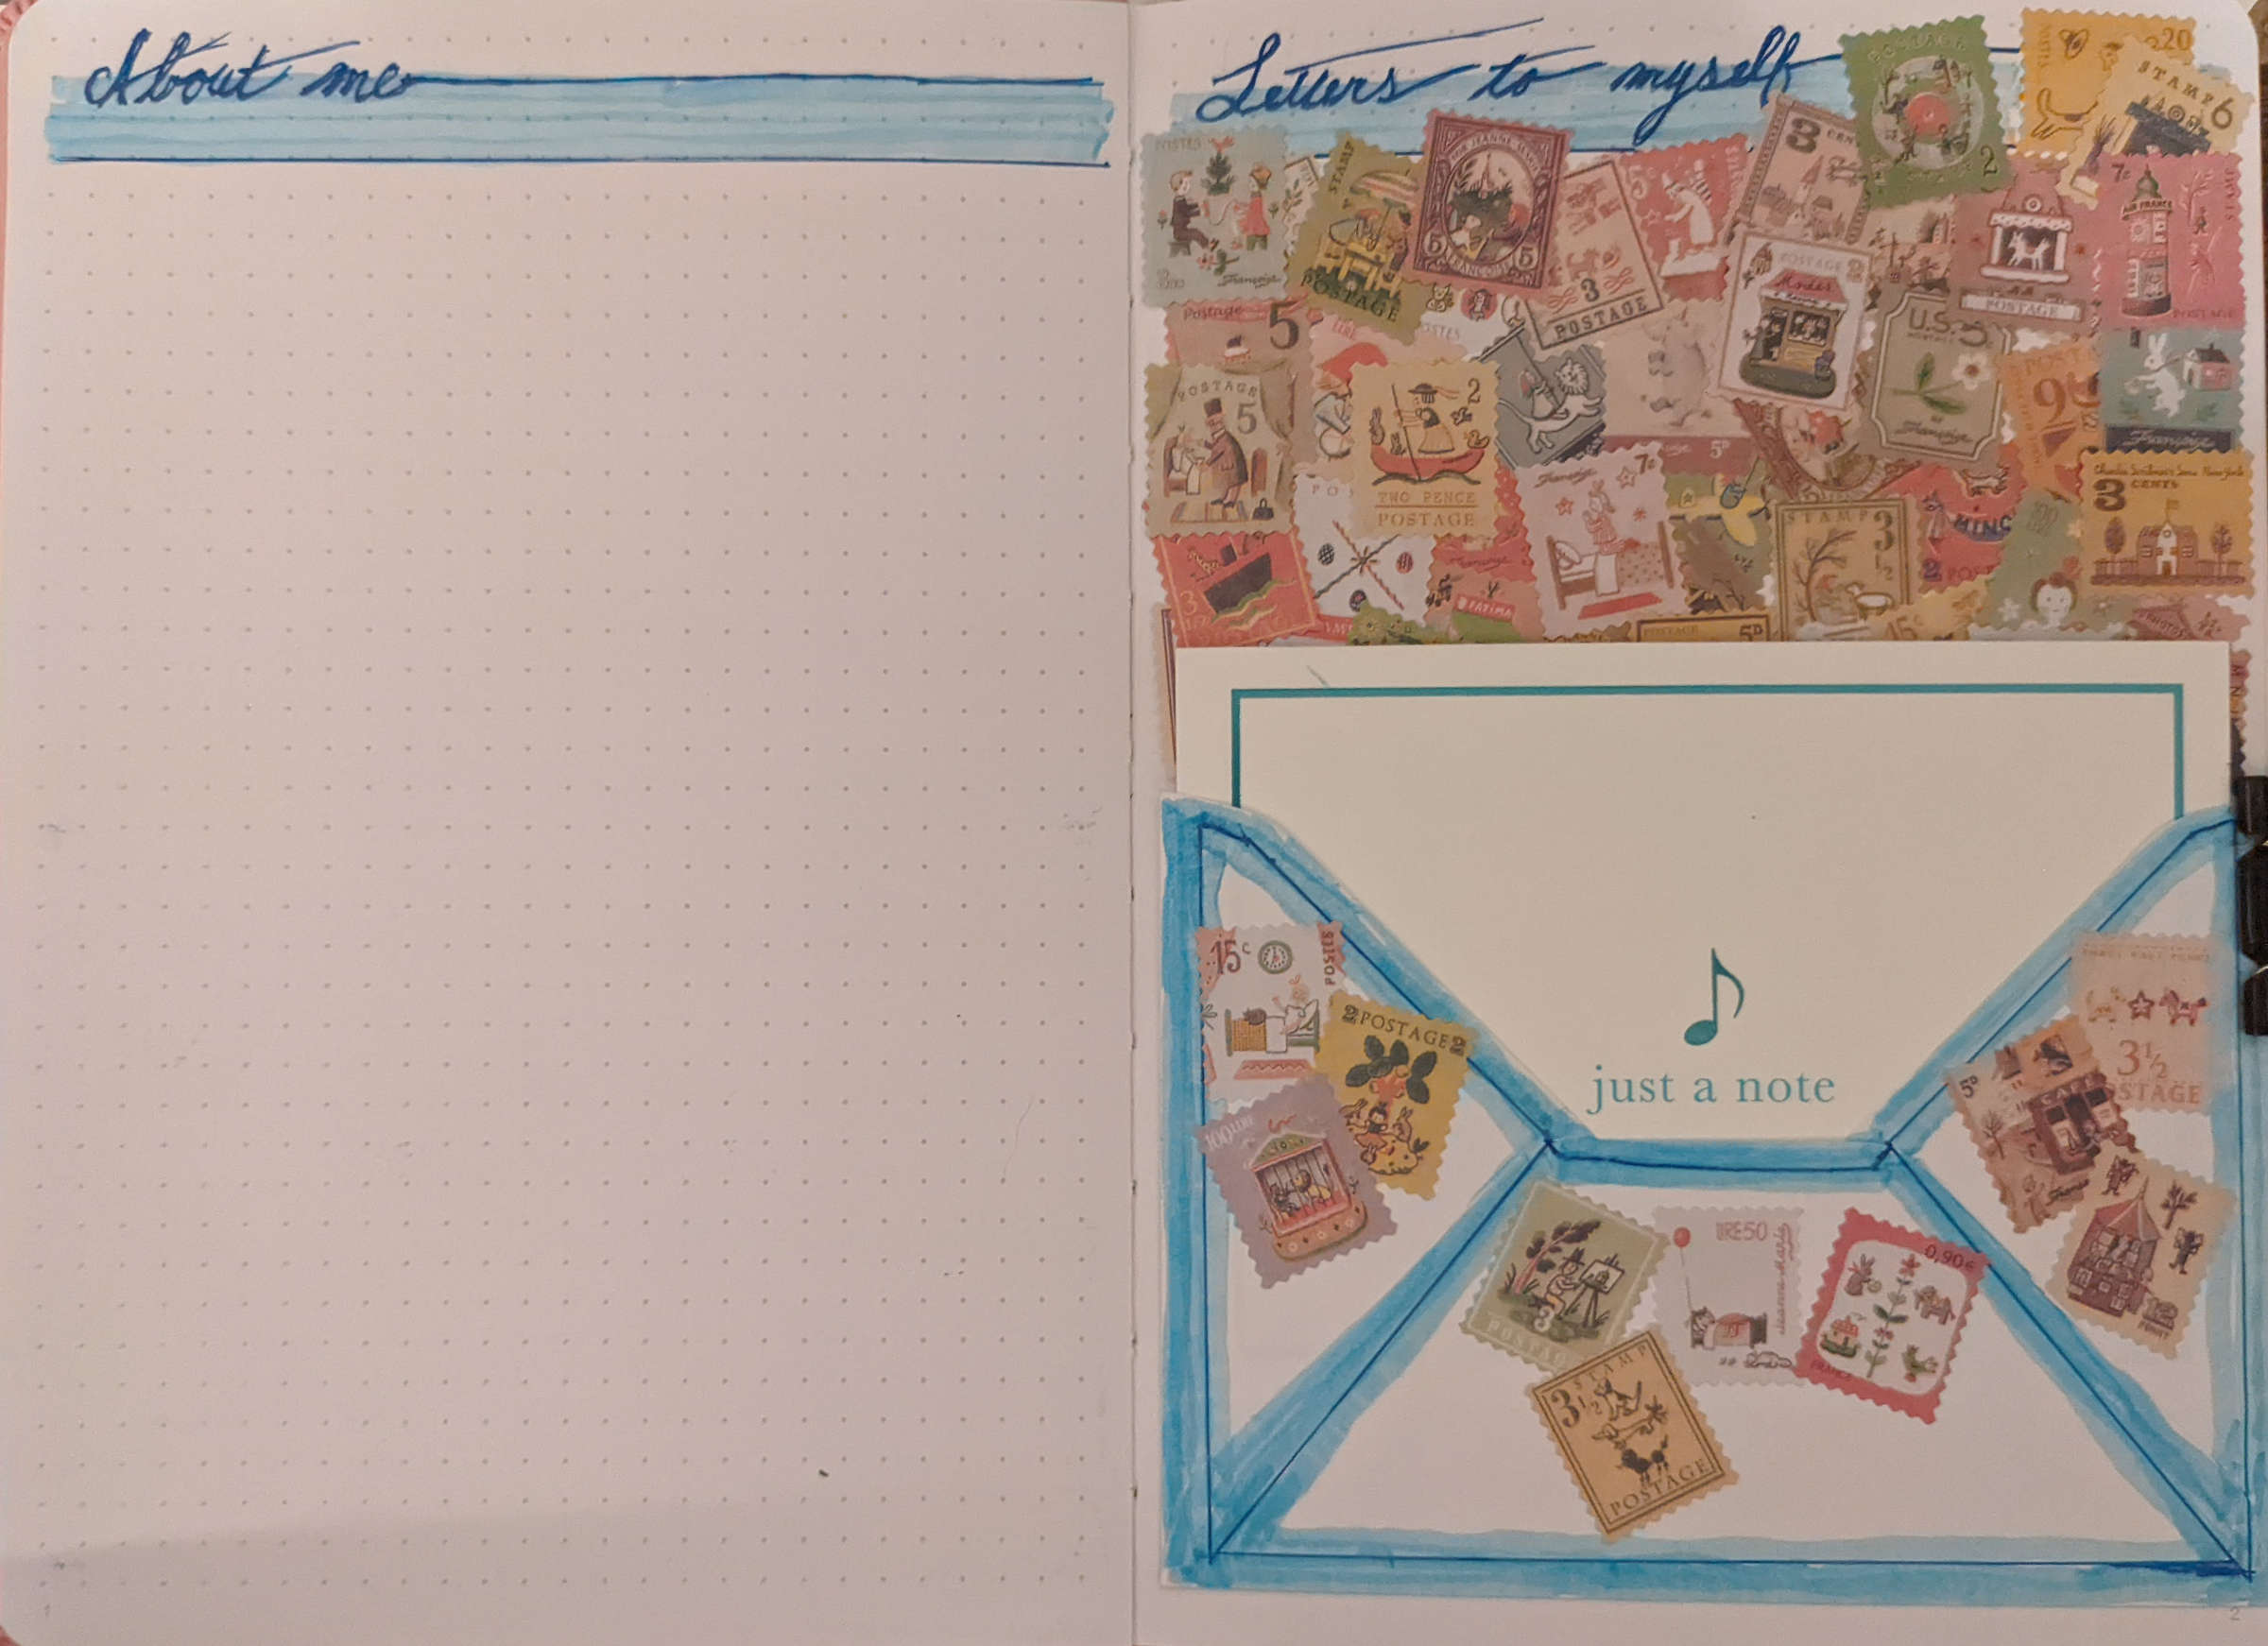 Two-page bullet journal spread. On the left is an “about me” section.  On the right is a ‘letters to myself’ section.